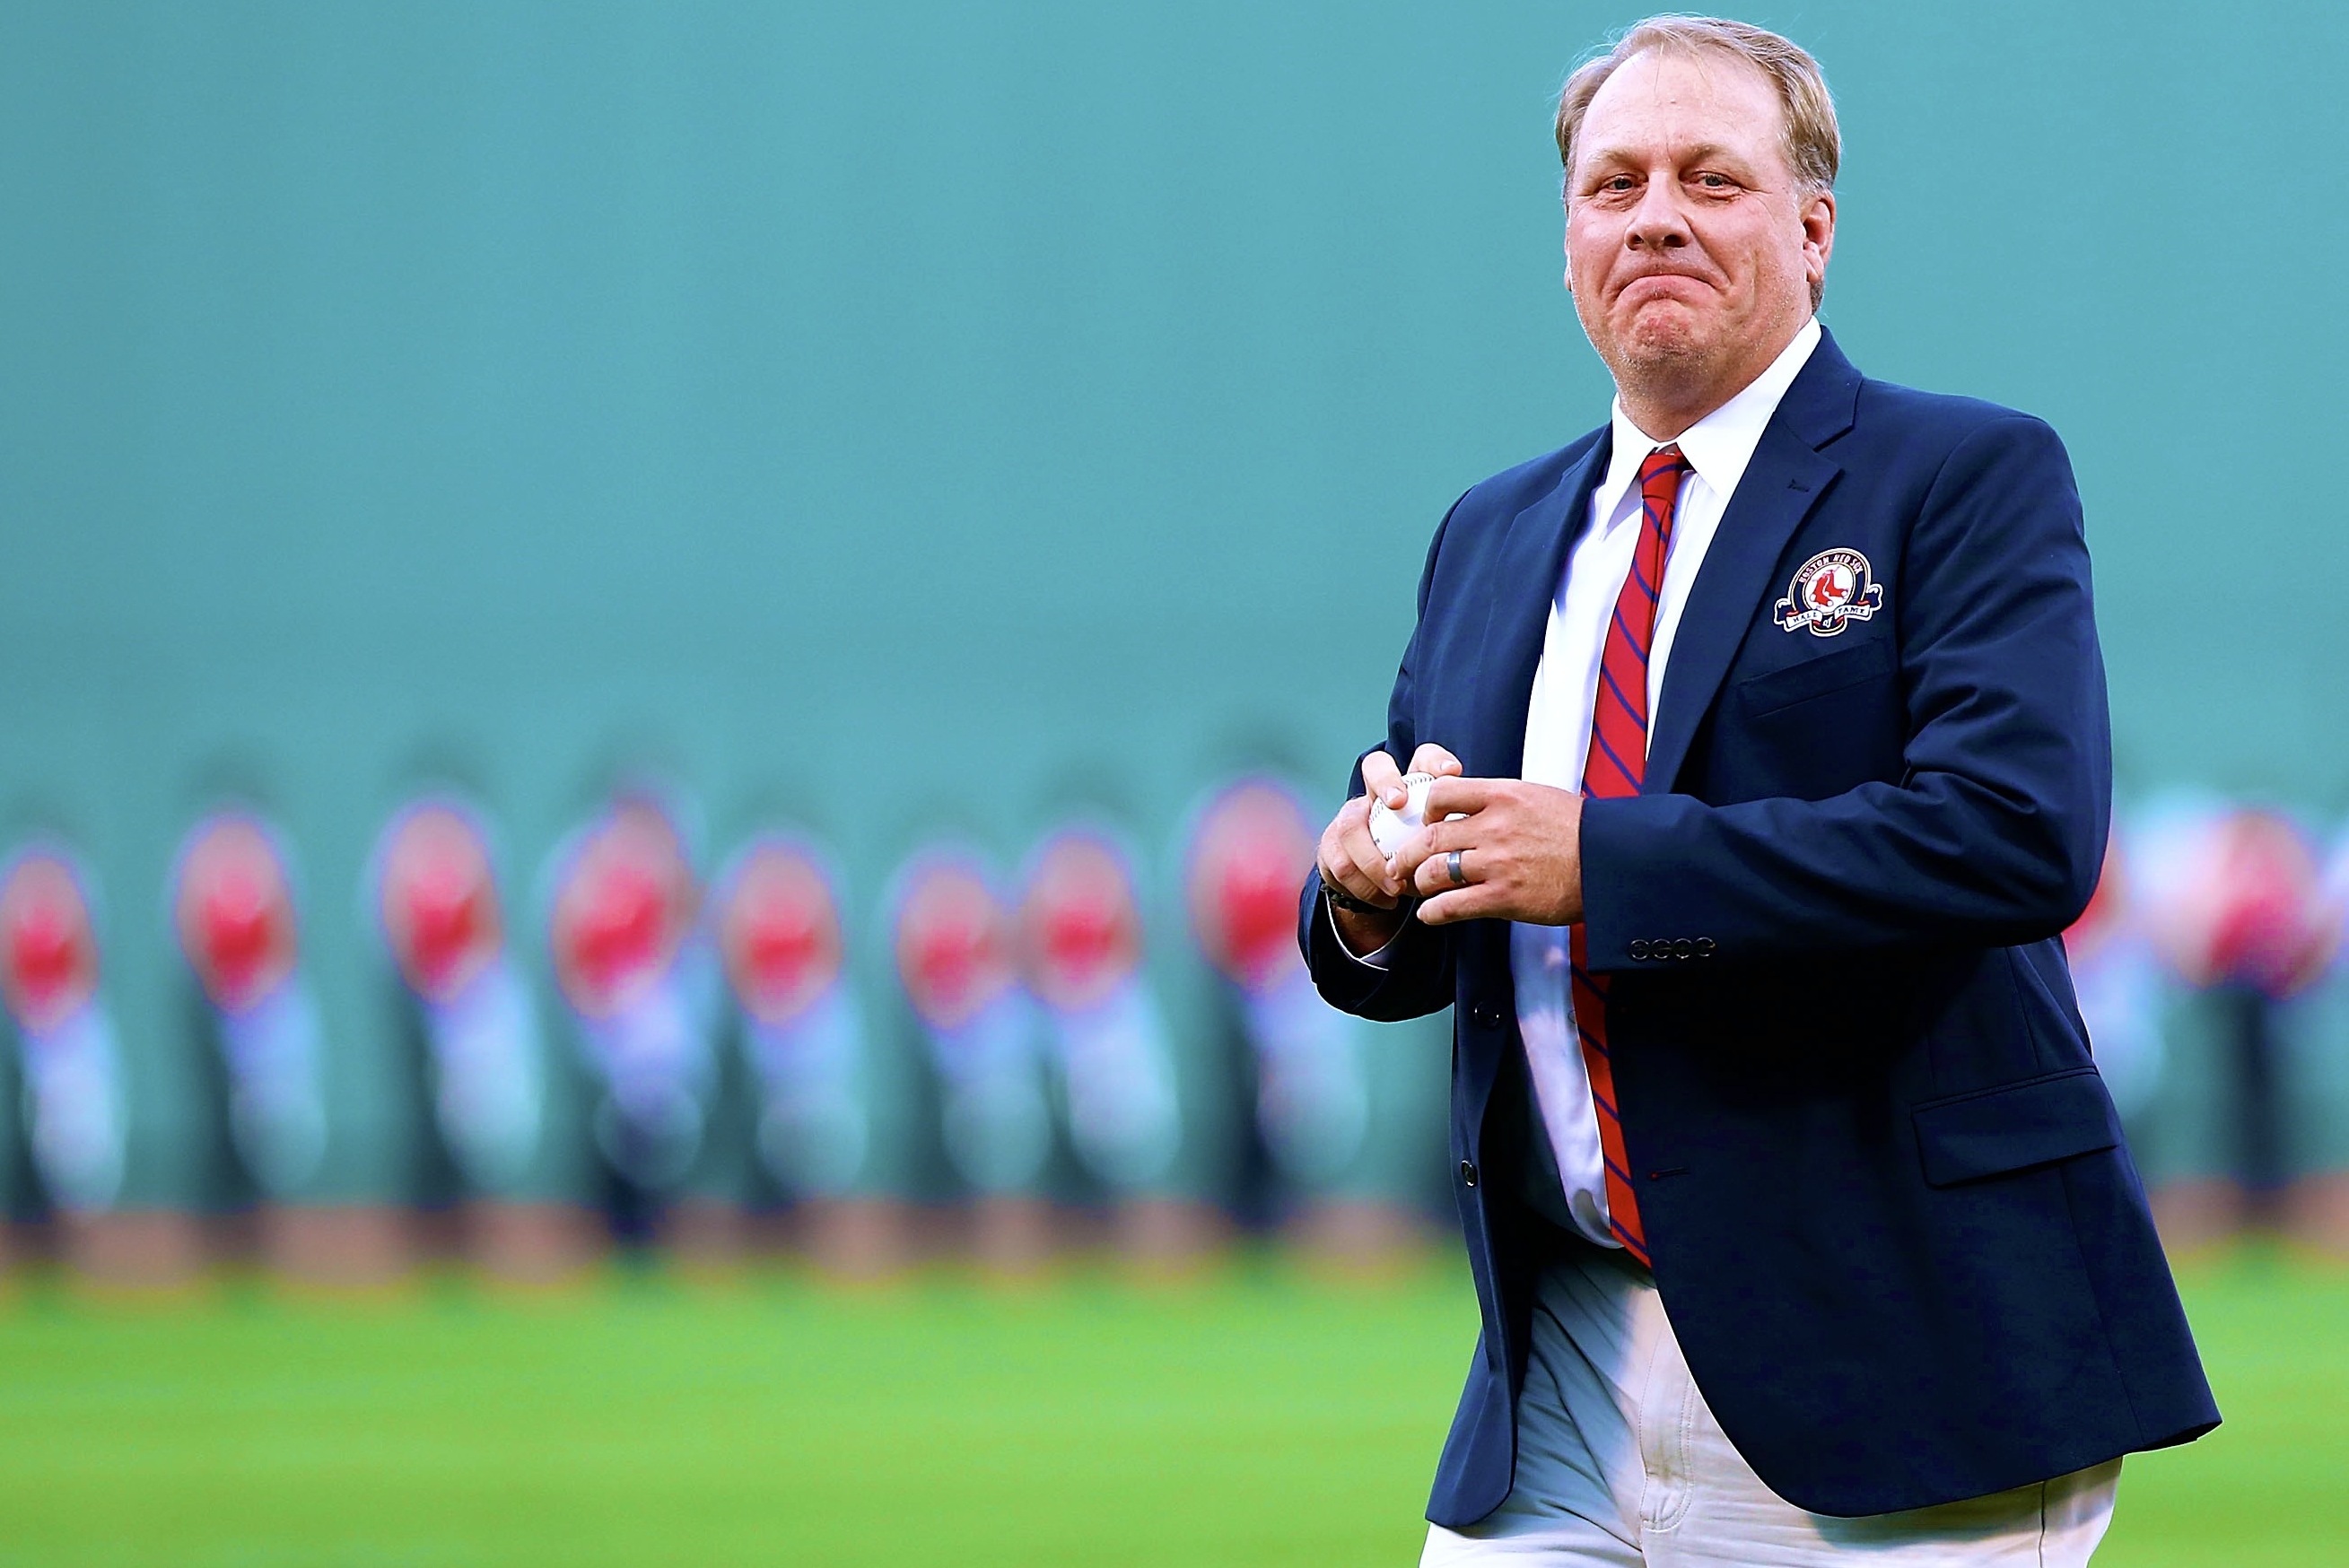 Curt Schilling Reveals He Has Been Diagnosed with Cancer